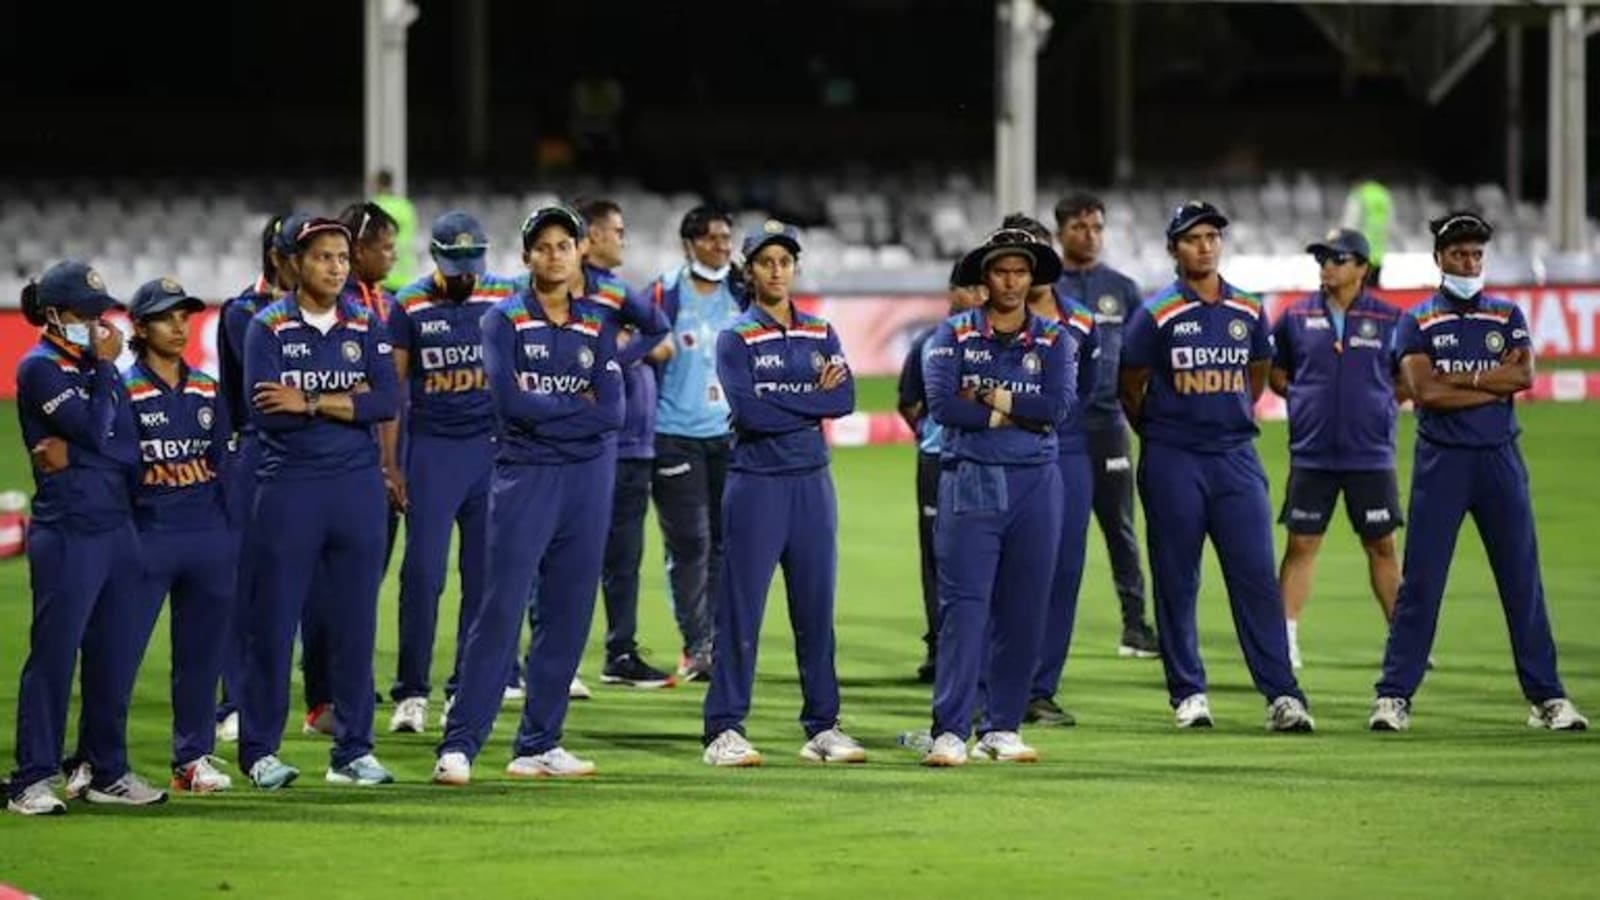 BCCI set to bid for 2025 Women's 50over World Cup hosting rights